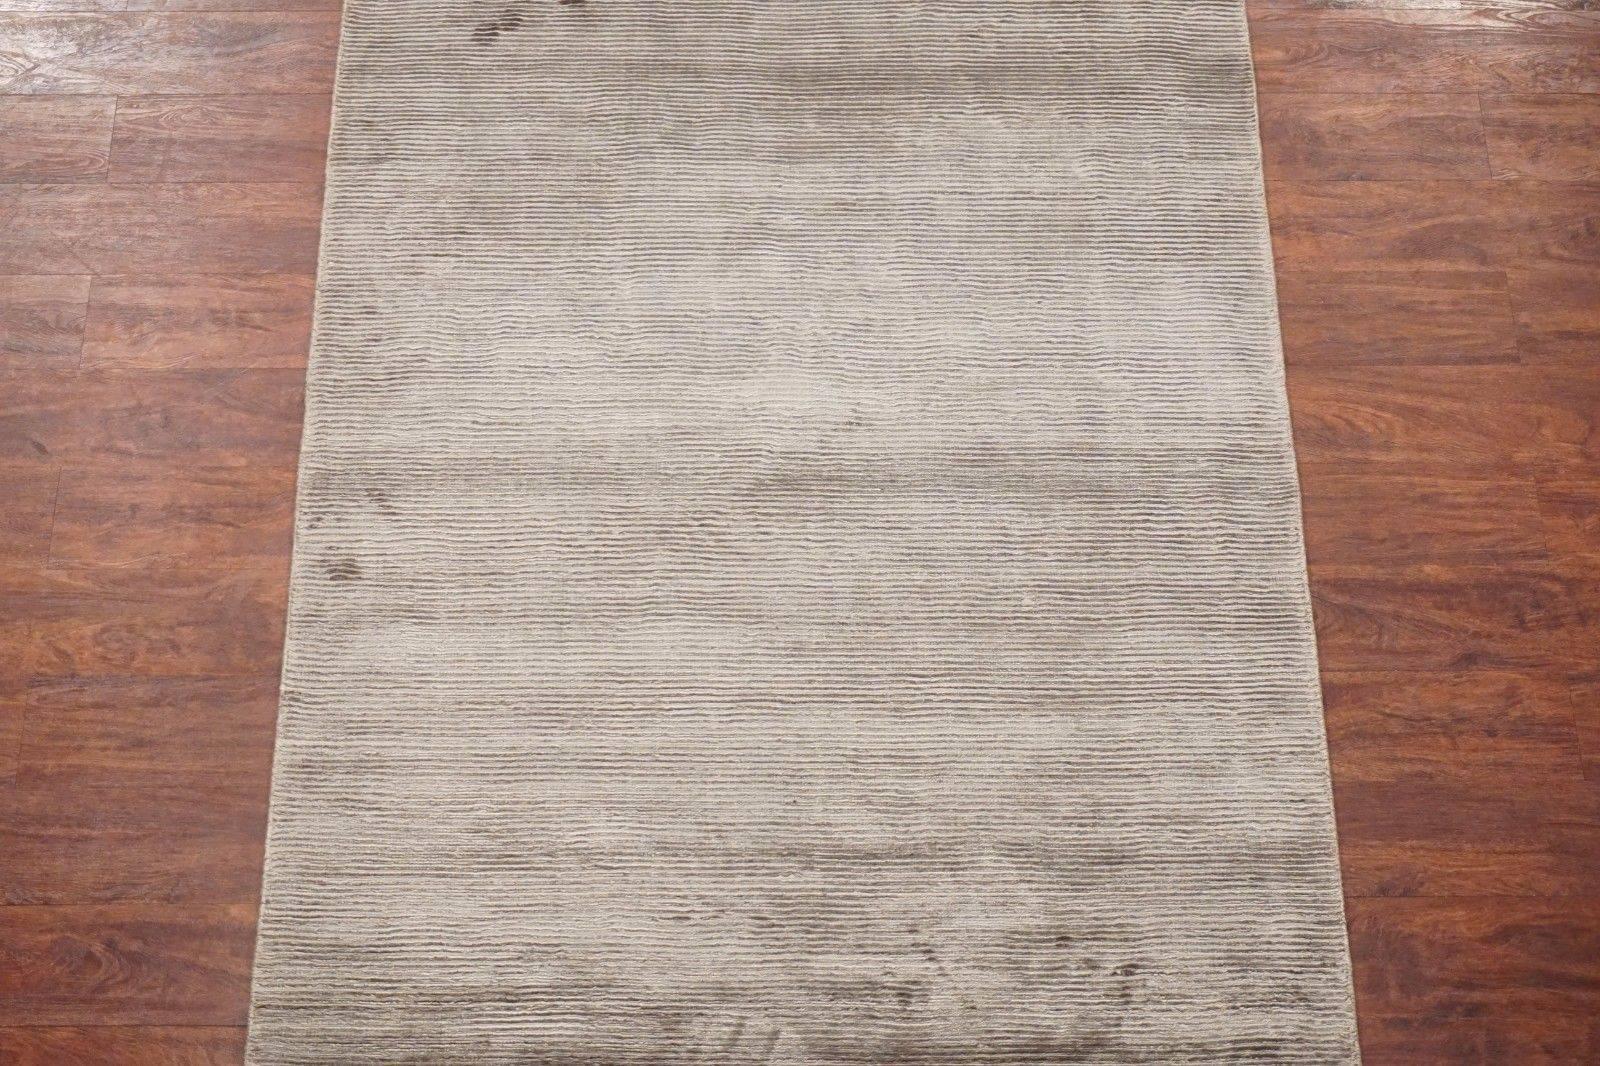 Modern bamboo silk area rug with striped design

2015

Measures: 4' x 6'

Handmade bamboo silk pile, cotton foundation

Field: Silvered-Brown